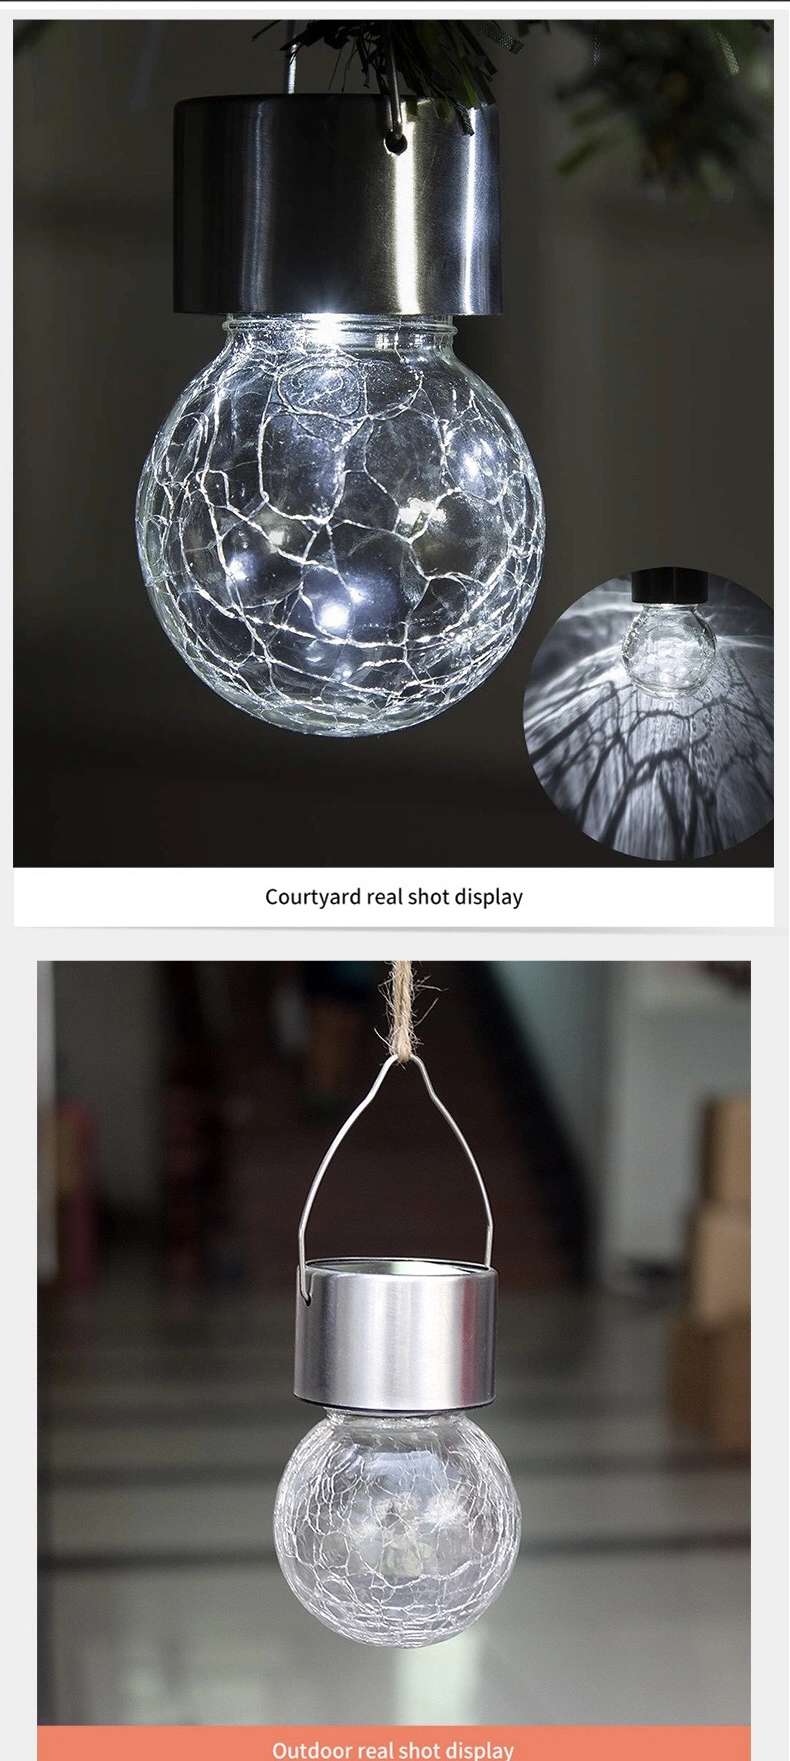 High Quality Festival Hanging Solar Light Colorful Cracked Hanging Ball Light Waterproof Outdoor Solar Lantern